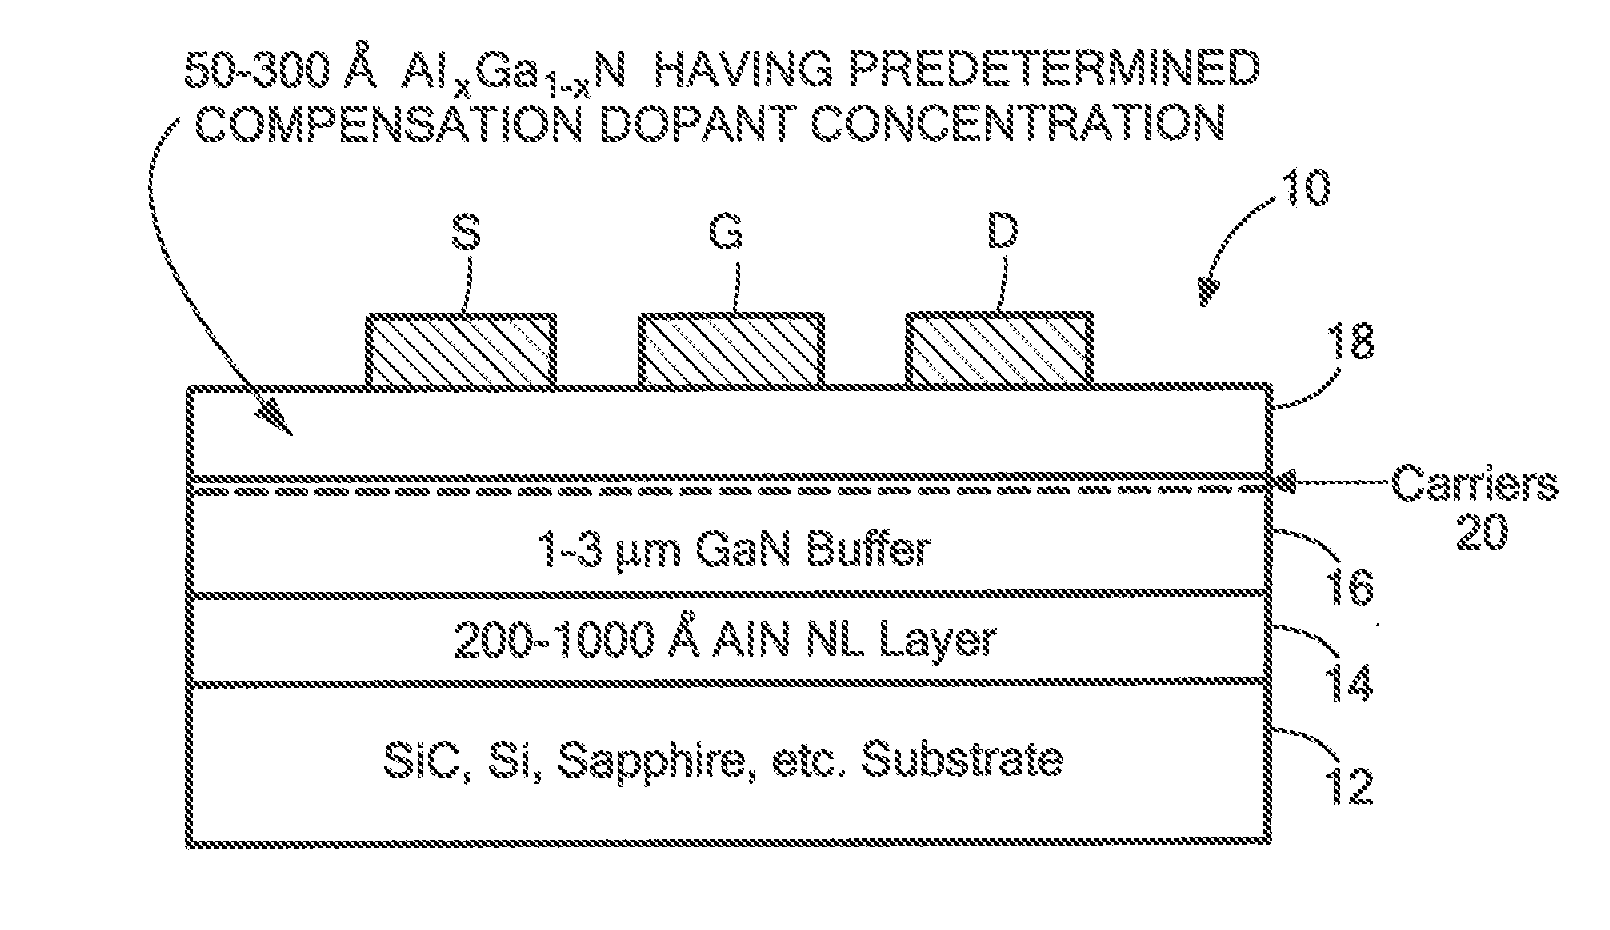 Polarization effect carrier generating device structures having compensation doping to reduce leakage current